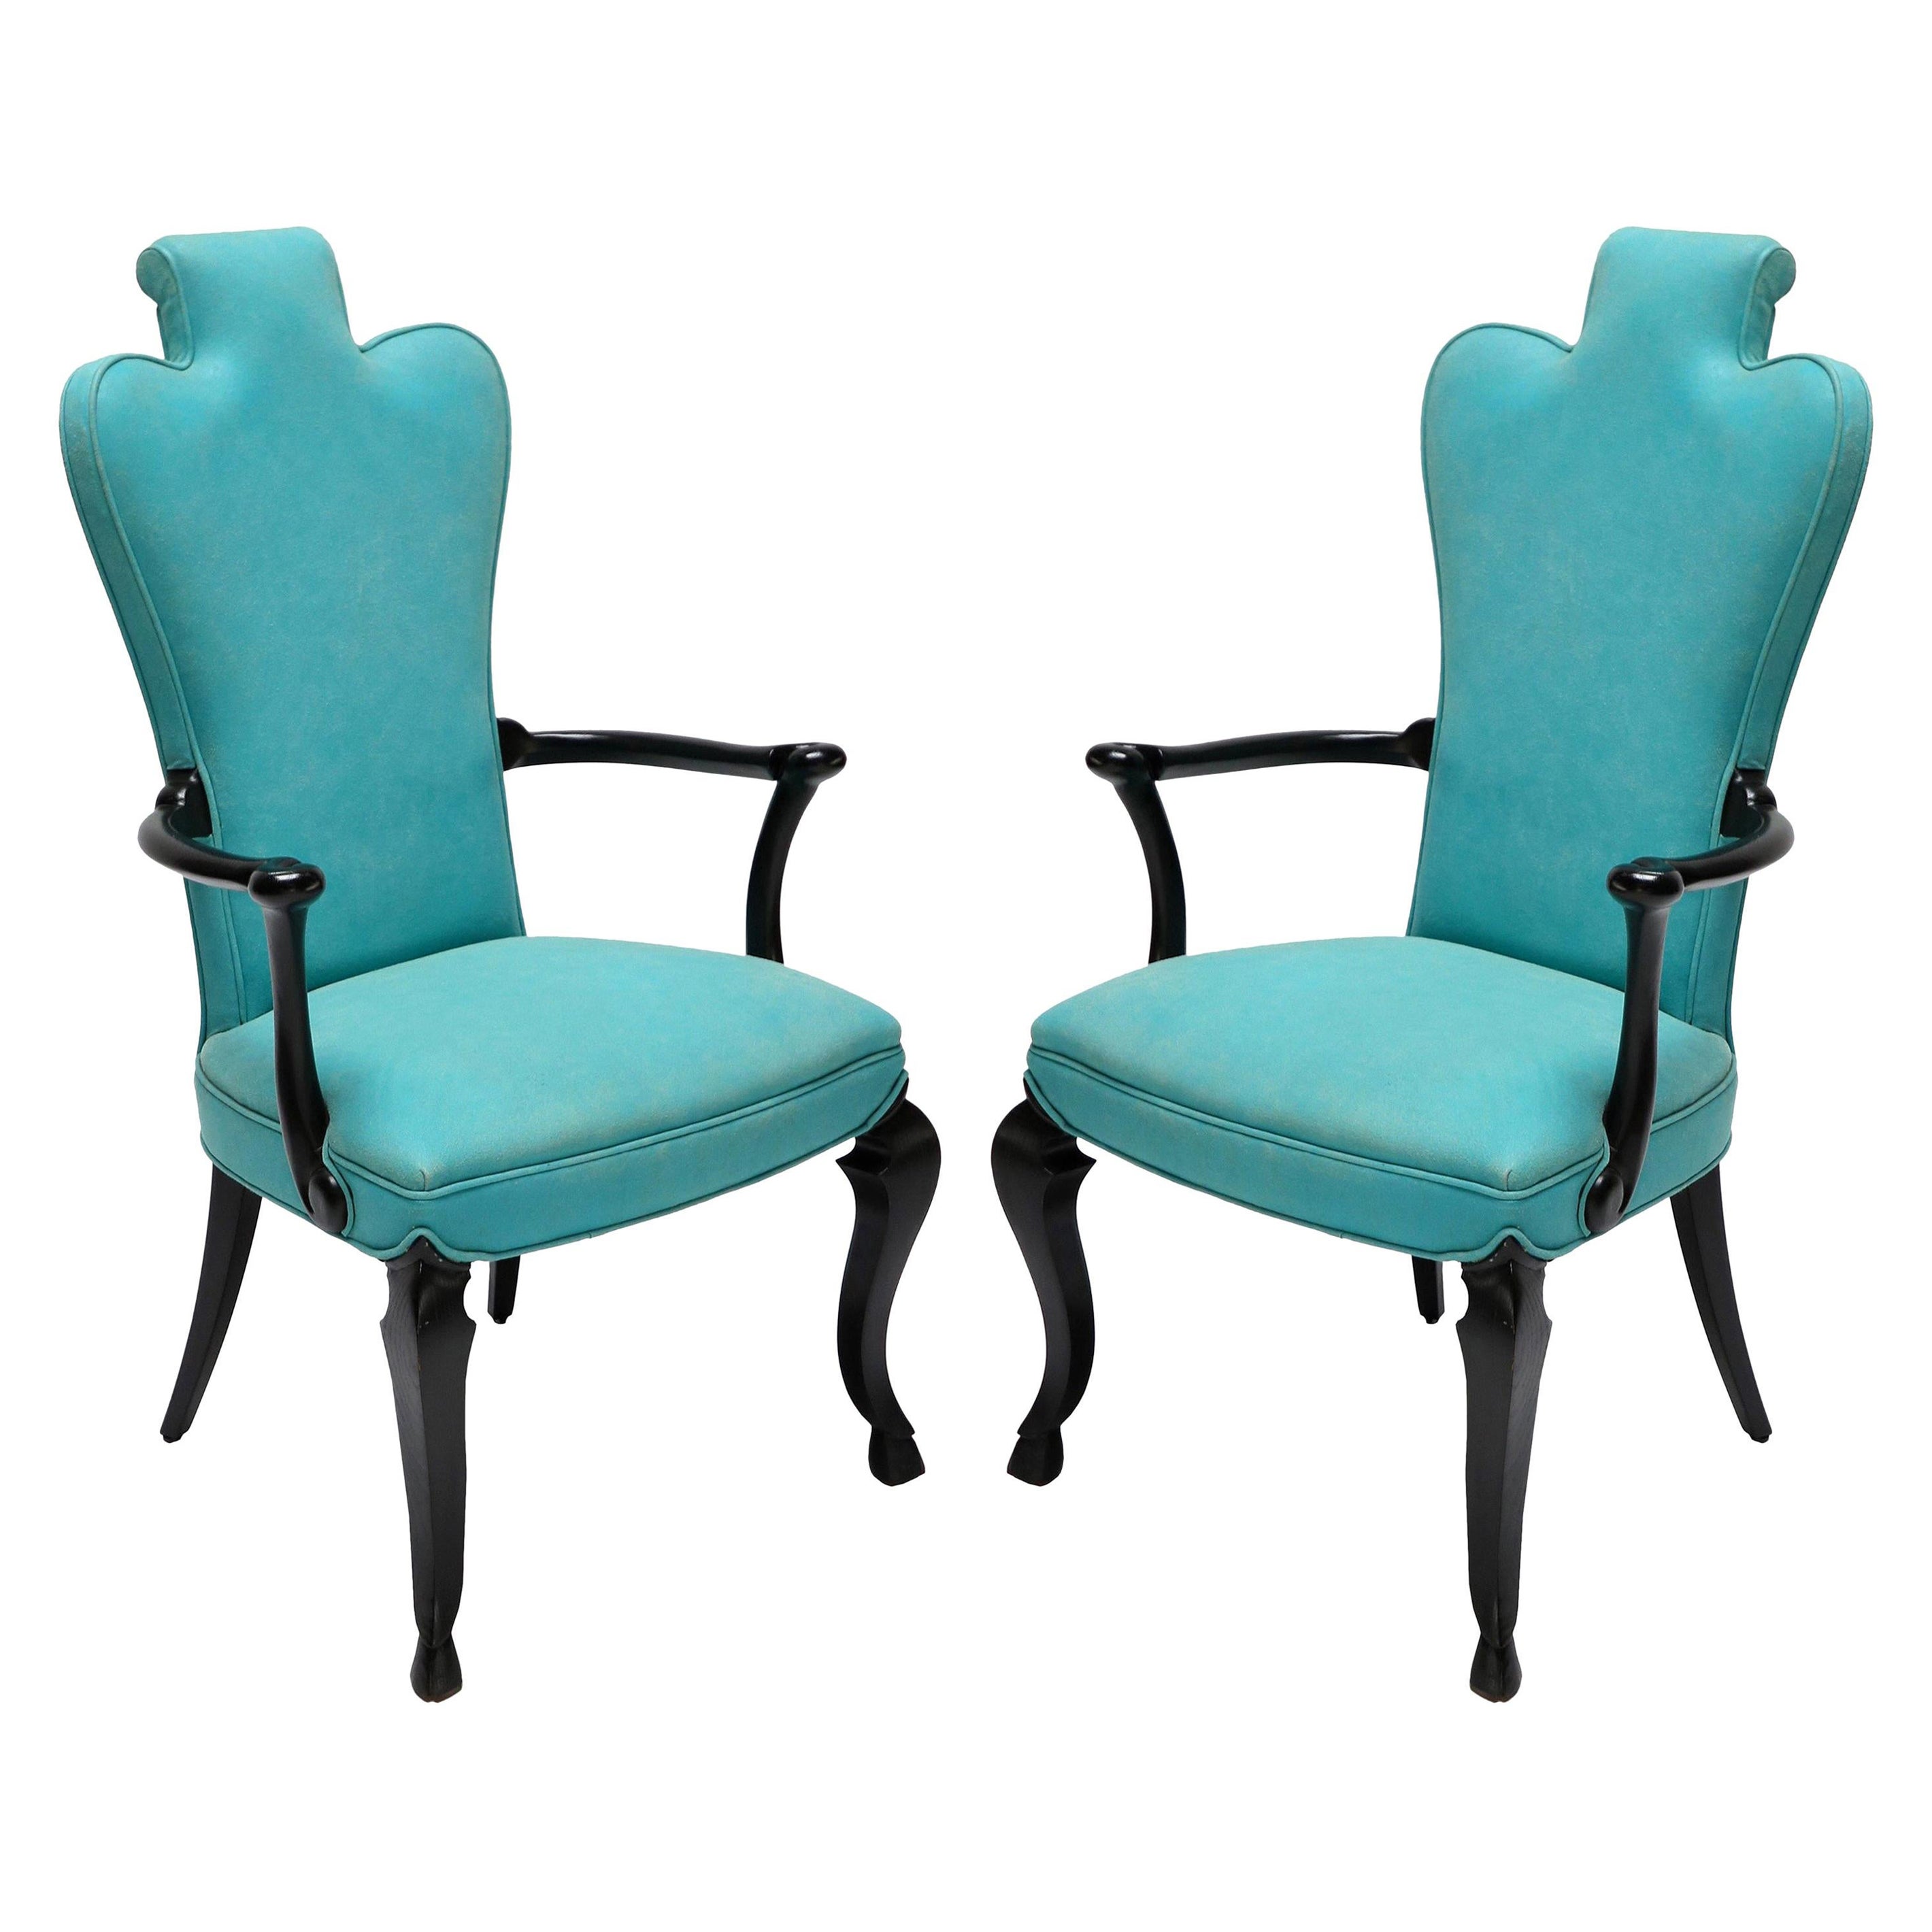 Pair of Custom Black Lacquer Armchairs in Turquoise Leather by Adesso Imports For Sale